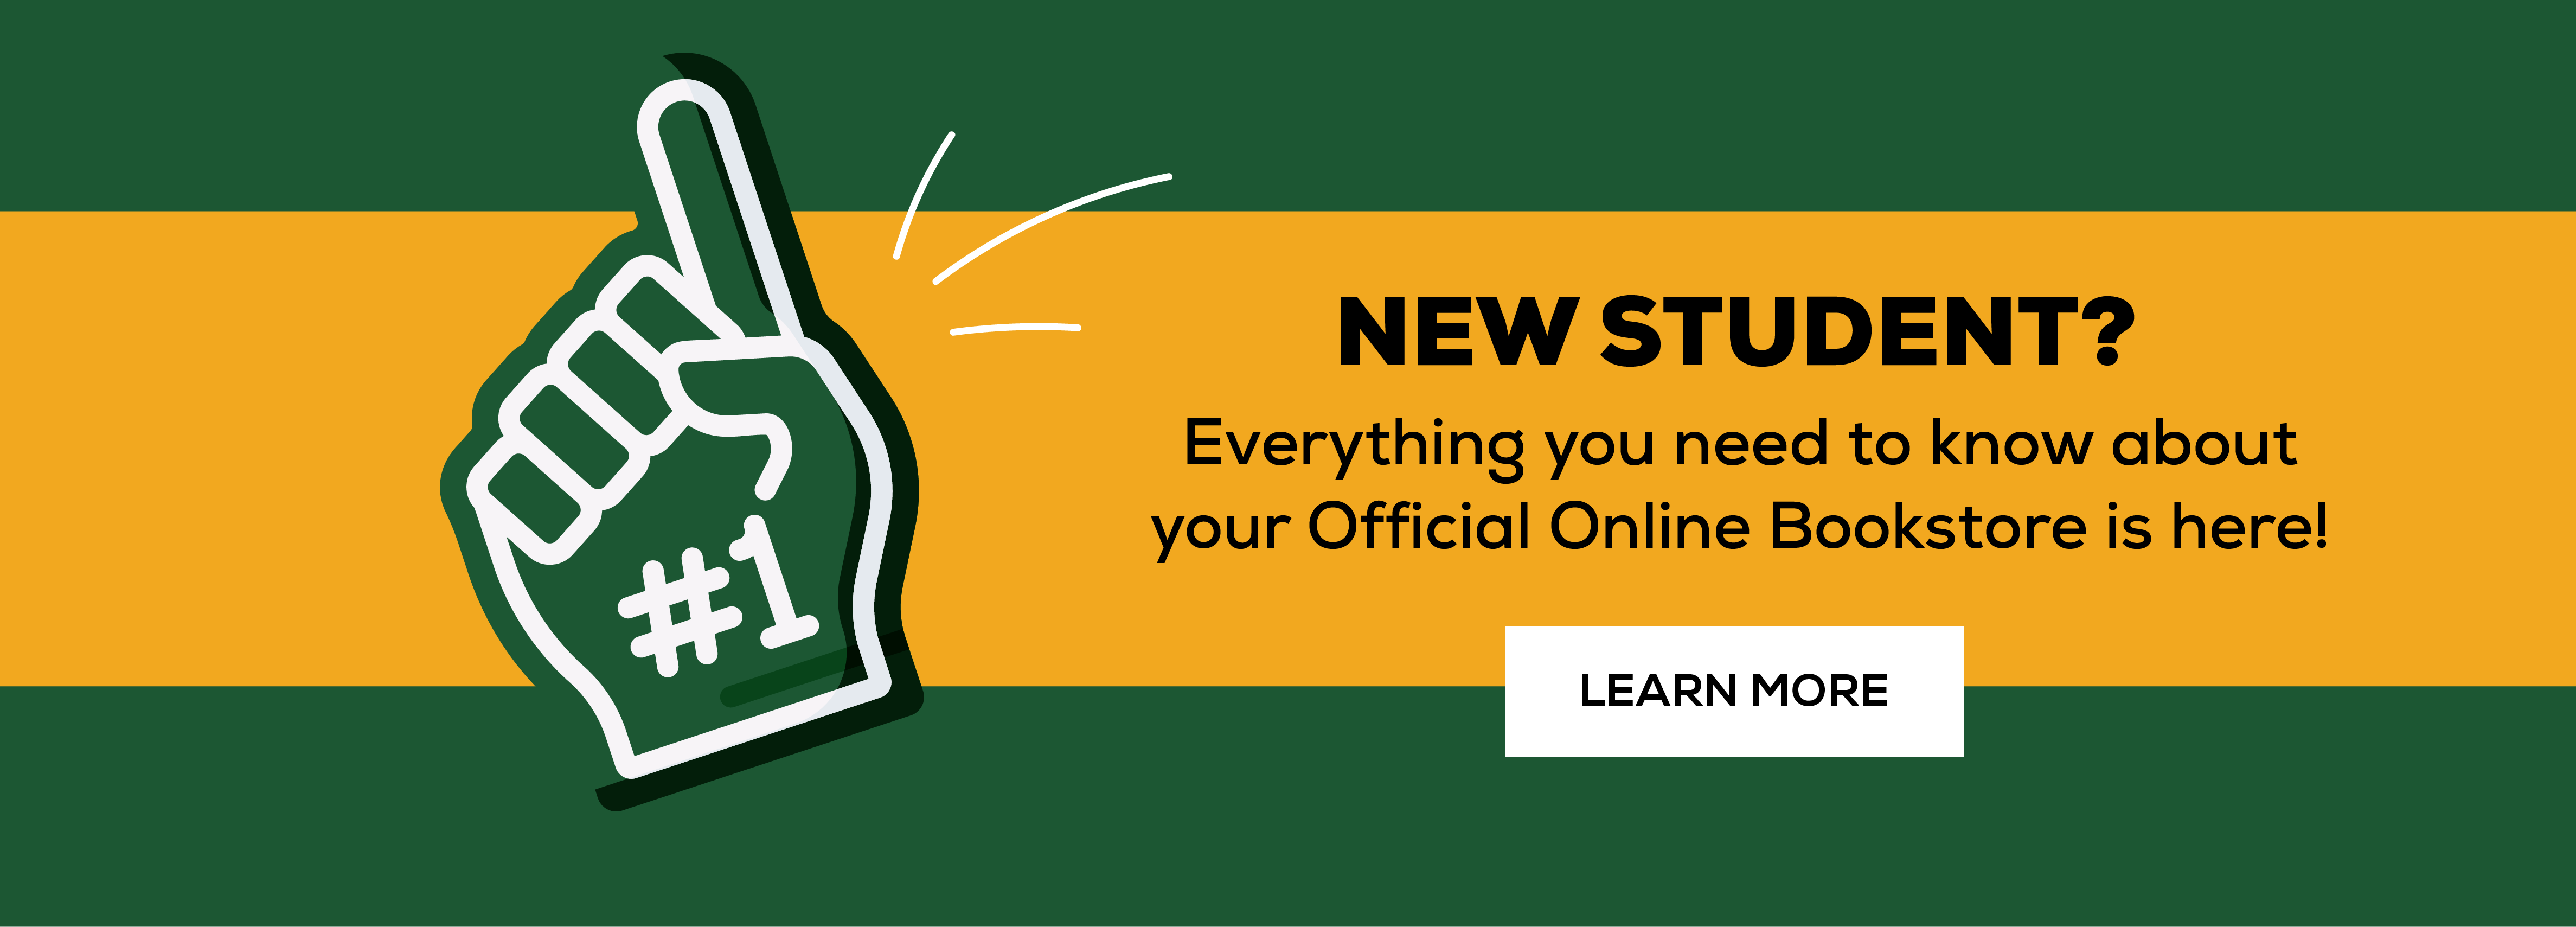 New Student Everything you need to know about your official online bookstore is here - learn more